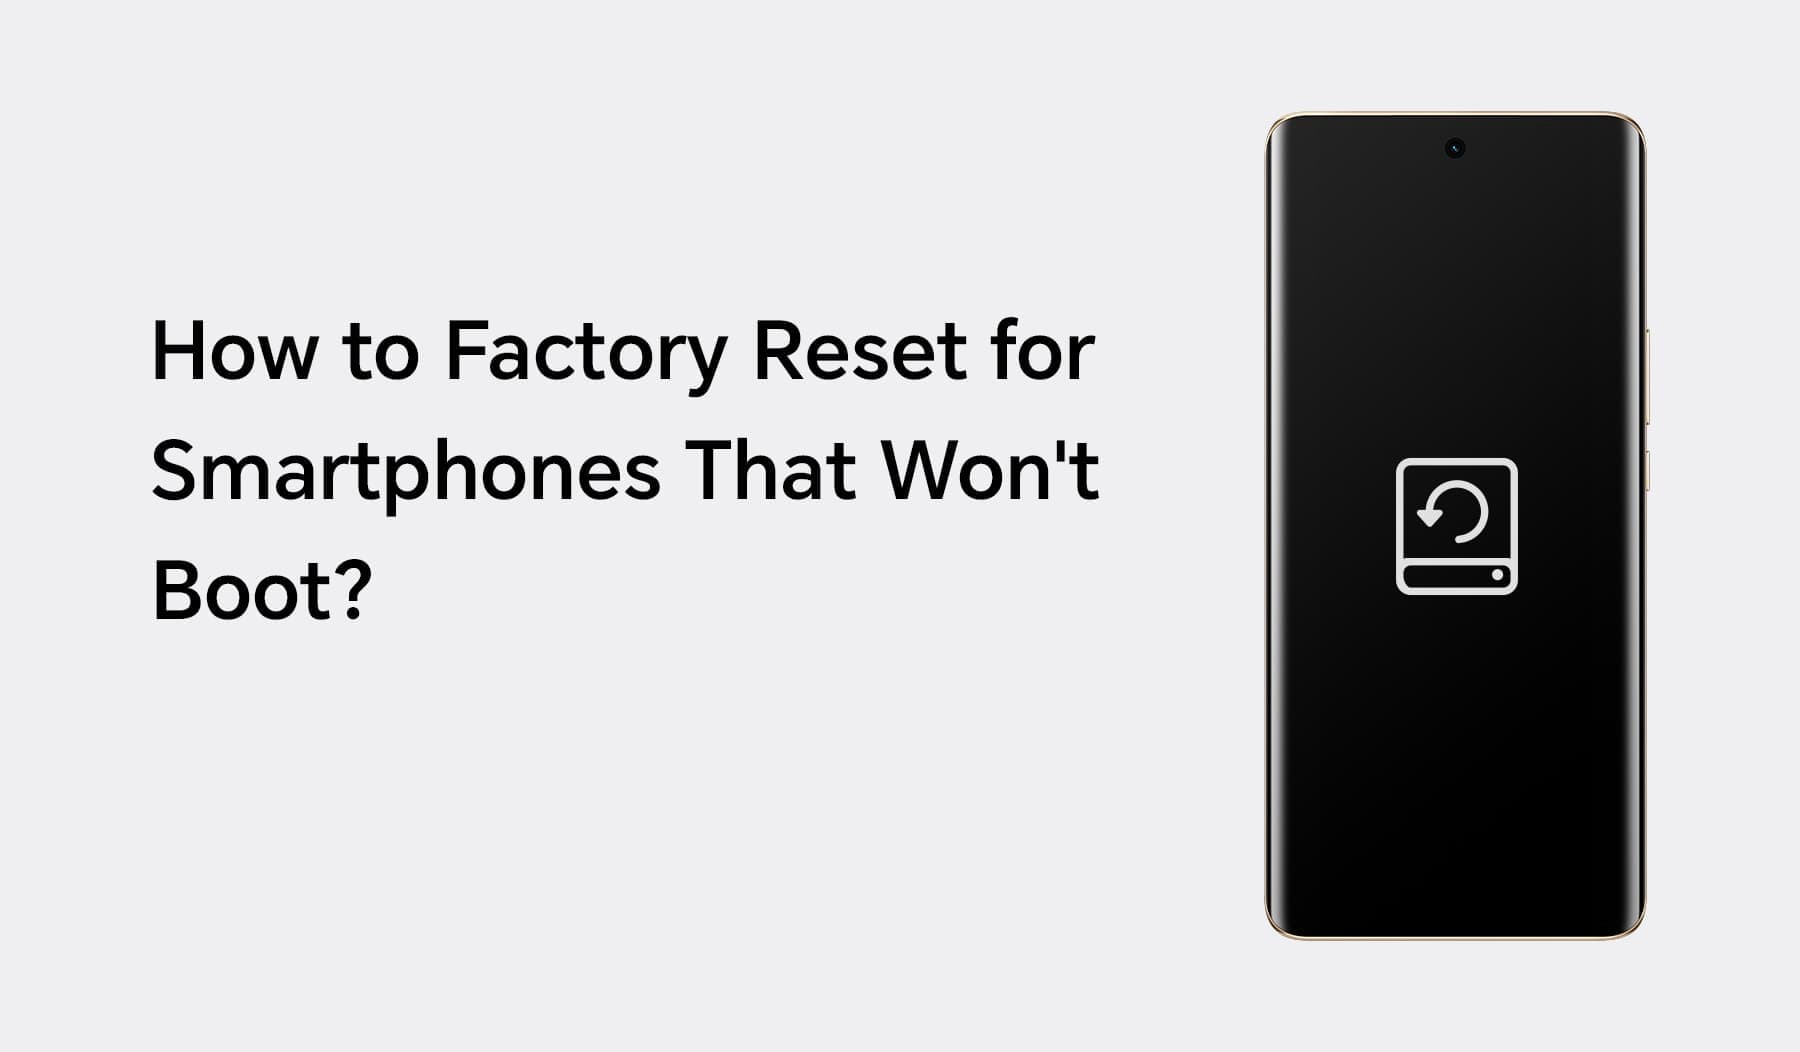 How to Factory Reset for Smartphones That Won't Boot?